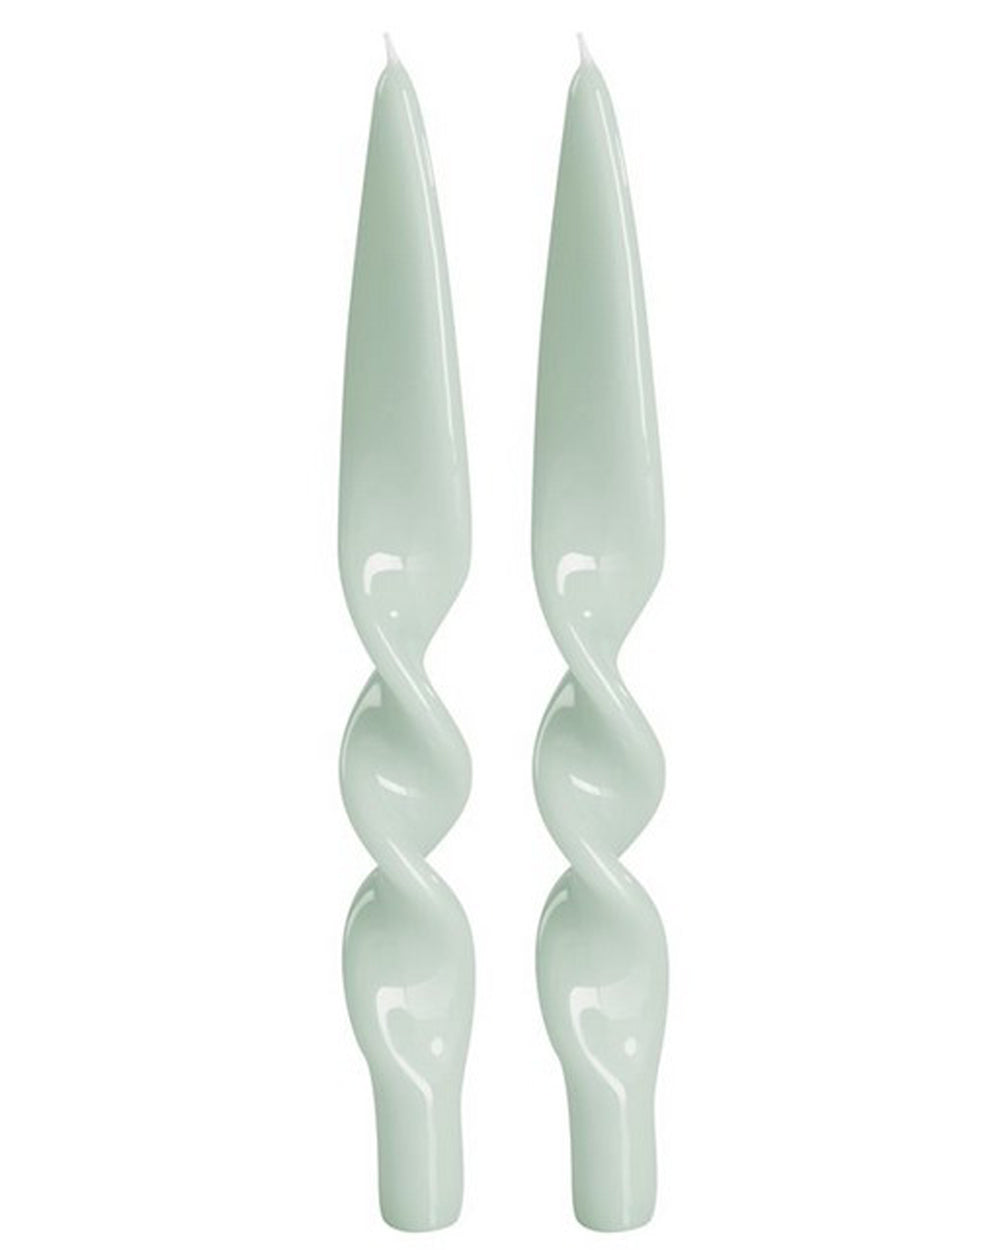 Water Green Twist Candles